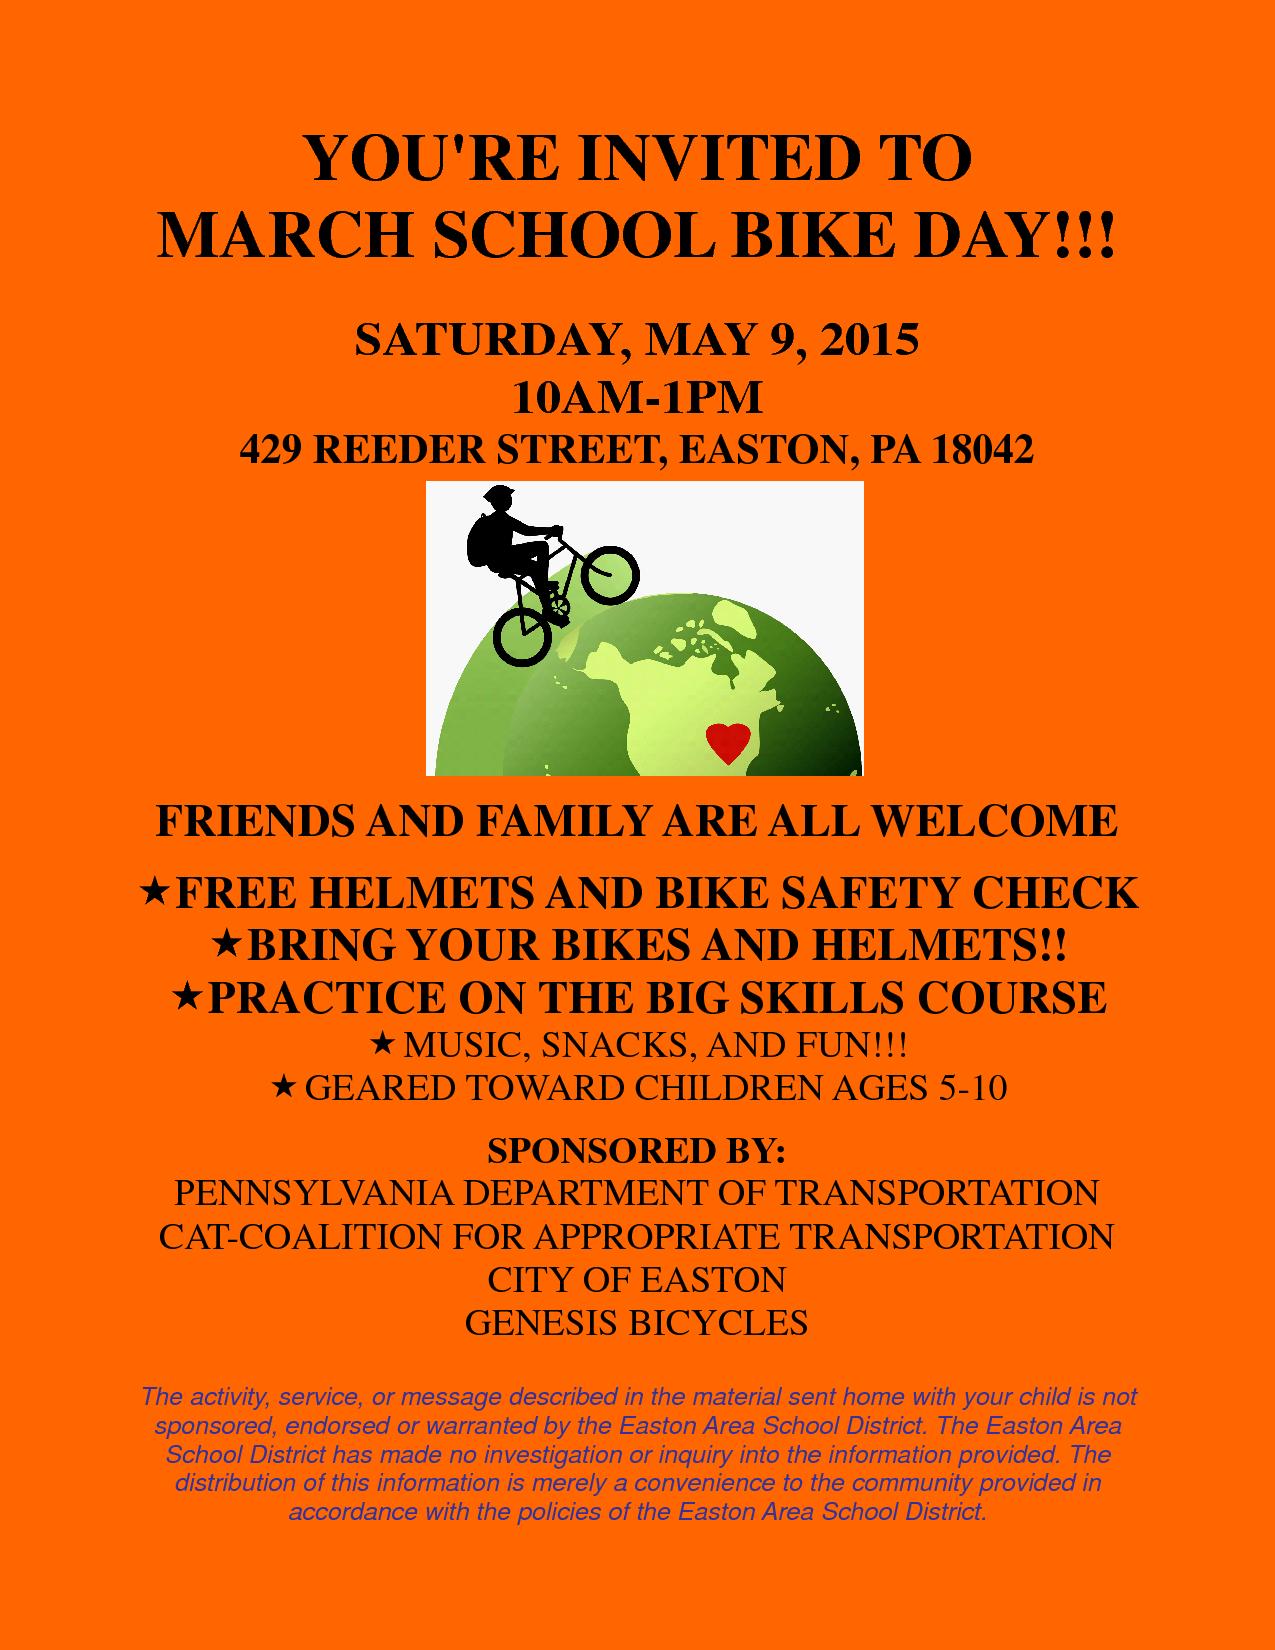 Bike Day at March Elementary School – Saturday May 9th, 10am-1pm